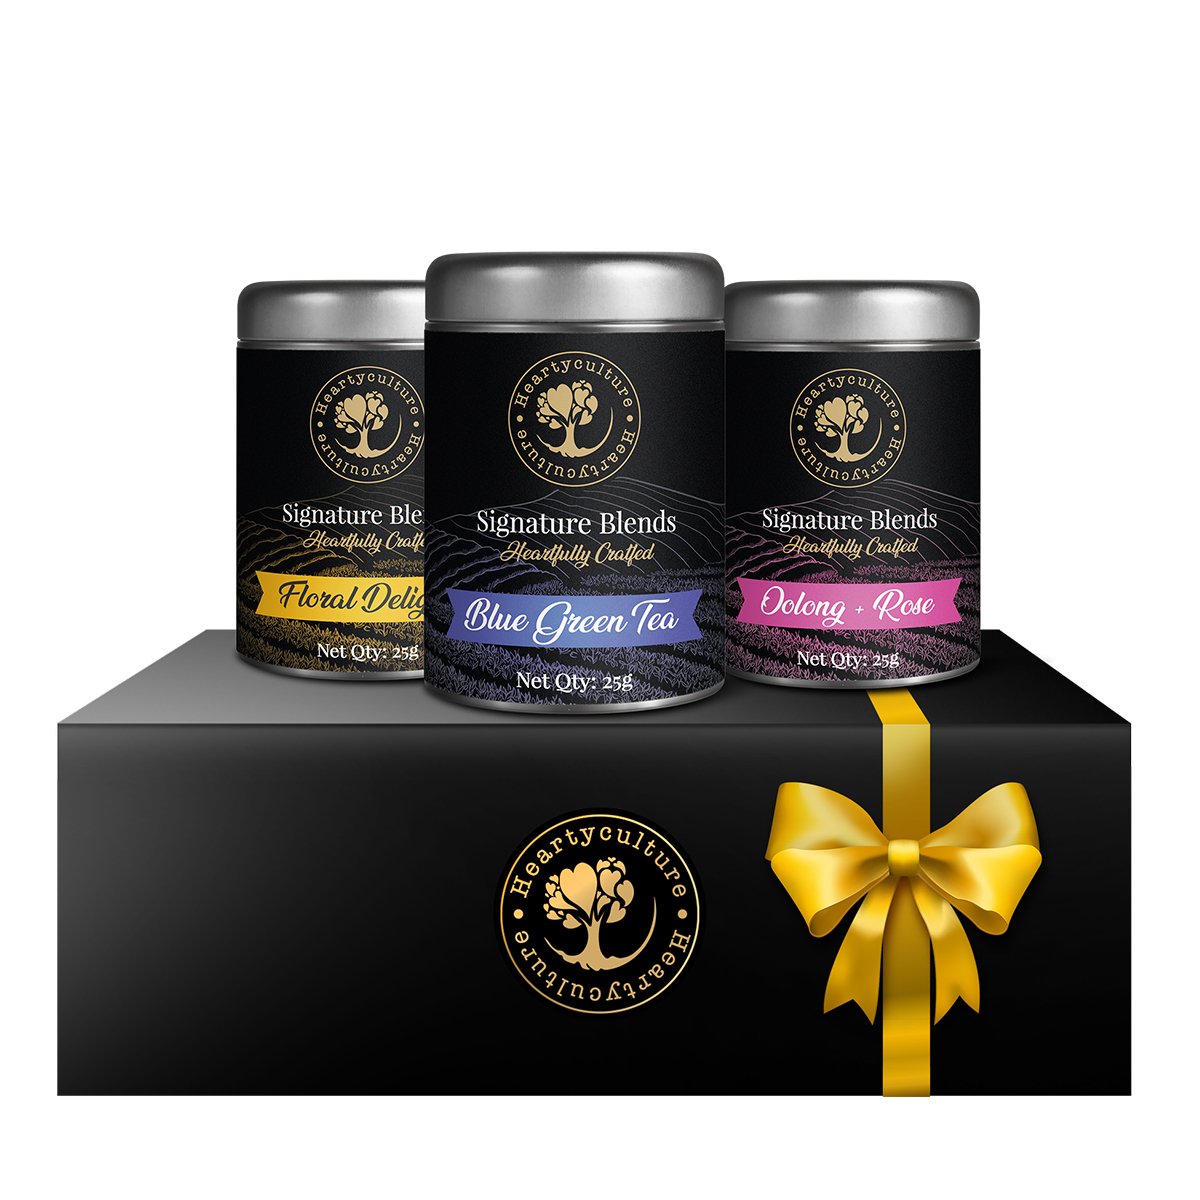 Heartyculture Signature Tea Blends - Three in One Box - hfnl!fe